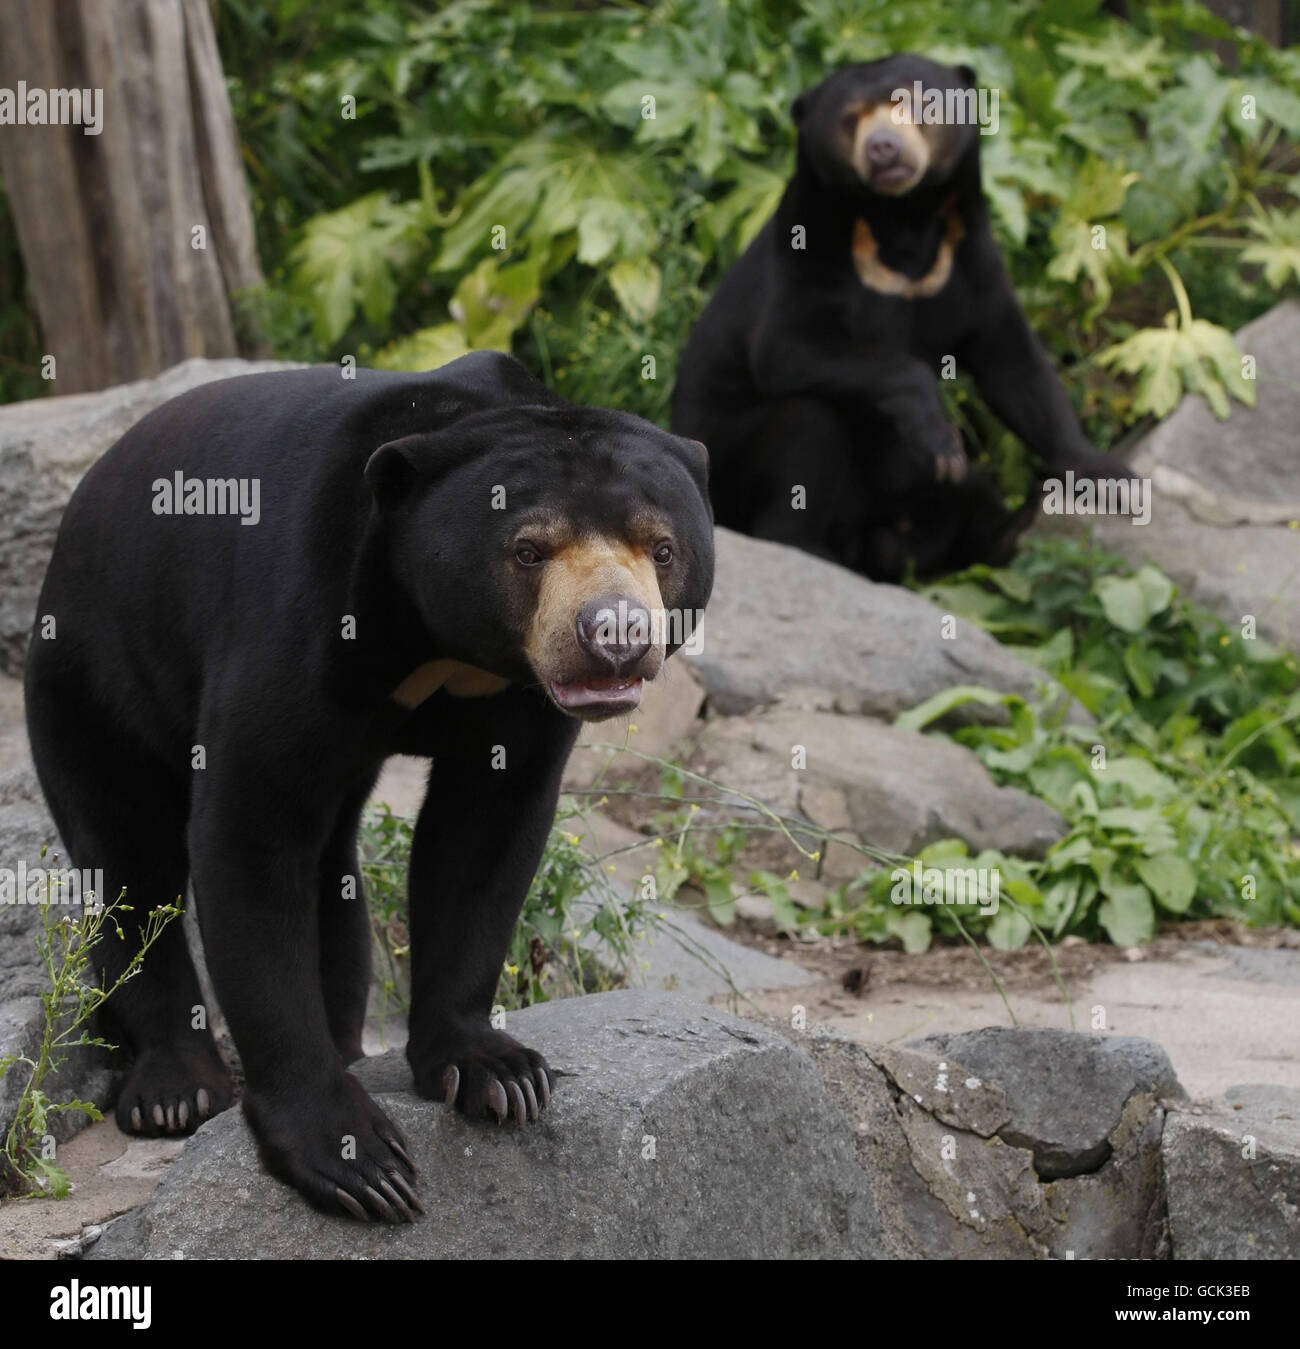 Sun bears Rotana (left) and Somnang (right) explore their new surroundings at Edinburgh Zoo. It is one of two rare sun bears to go on public display at a Scottish zoo after a 6,000-mile journey from Cambodia. Stock Photo